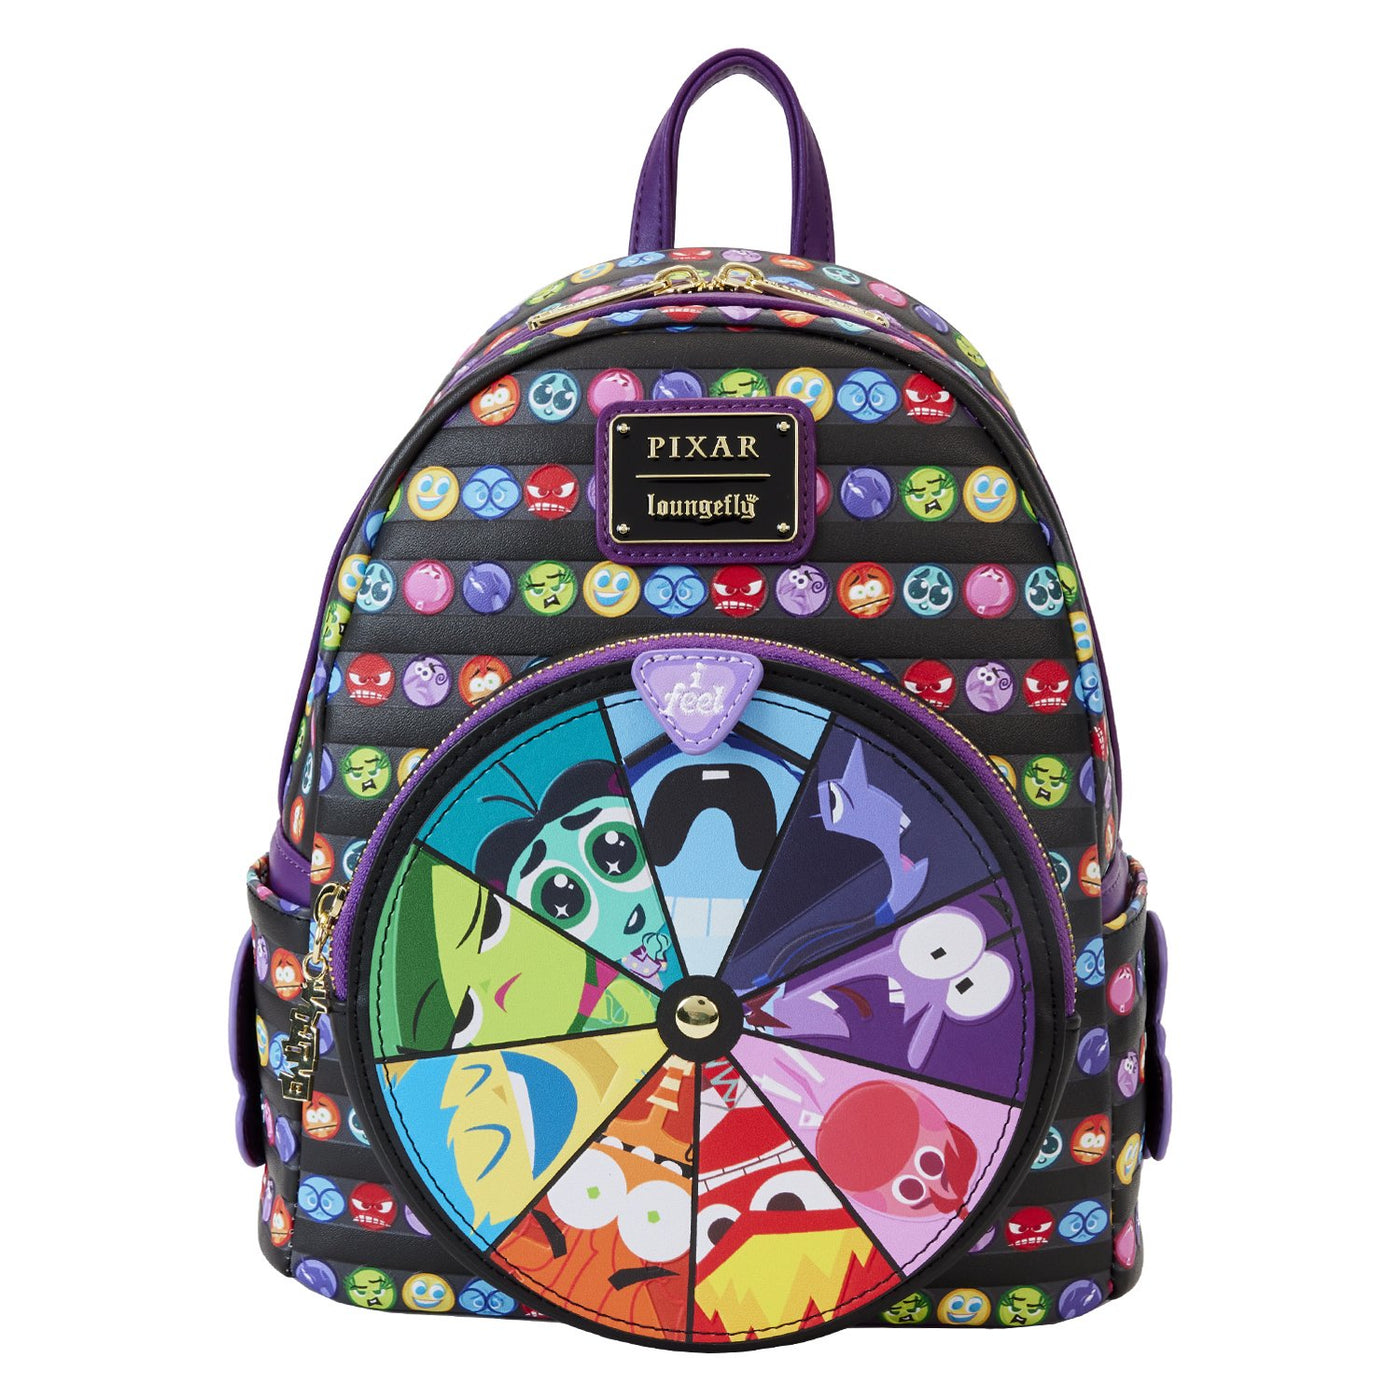 Loungefly Pixar Inside Out 2 Core Memories Mini Backpack - Front Spinning Feature Landing on Sadness